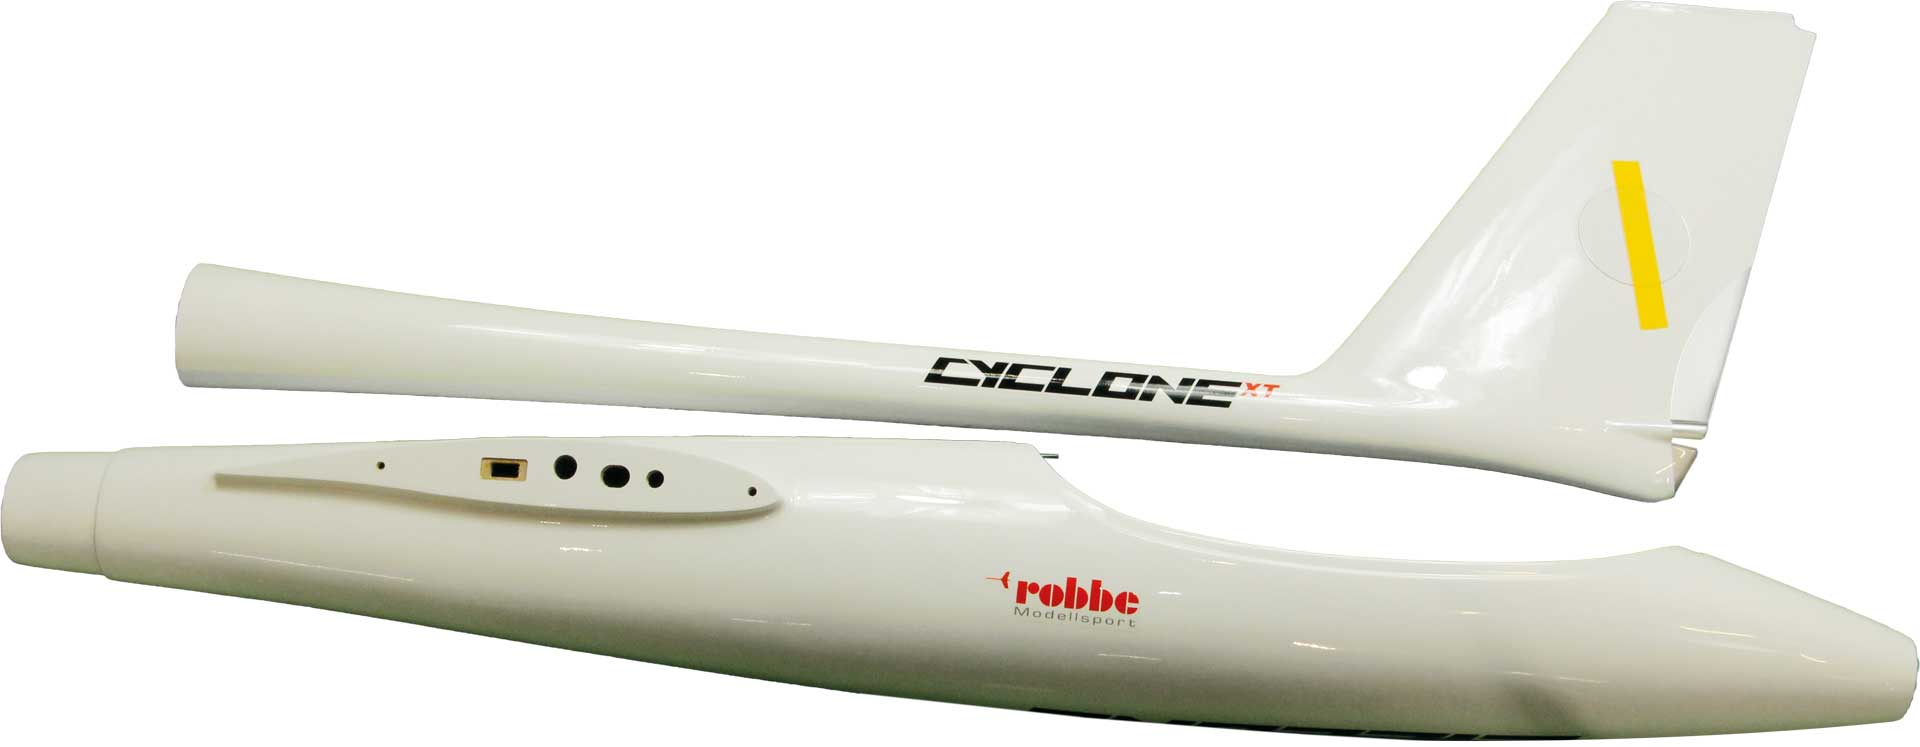 Robbe Modellsport Fuselage Cyclone XT ARF 6,2m without electronics